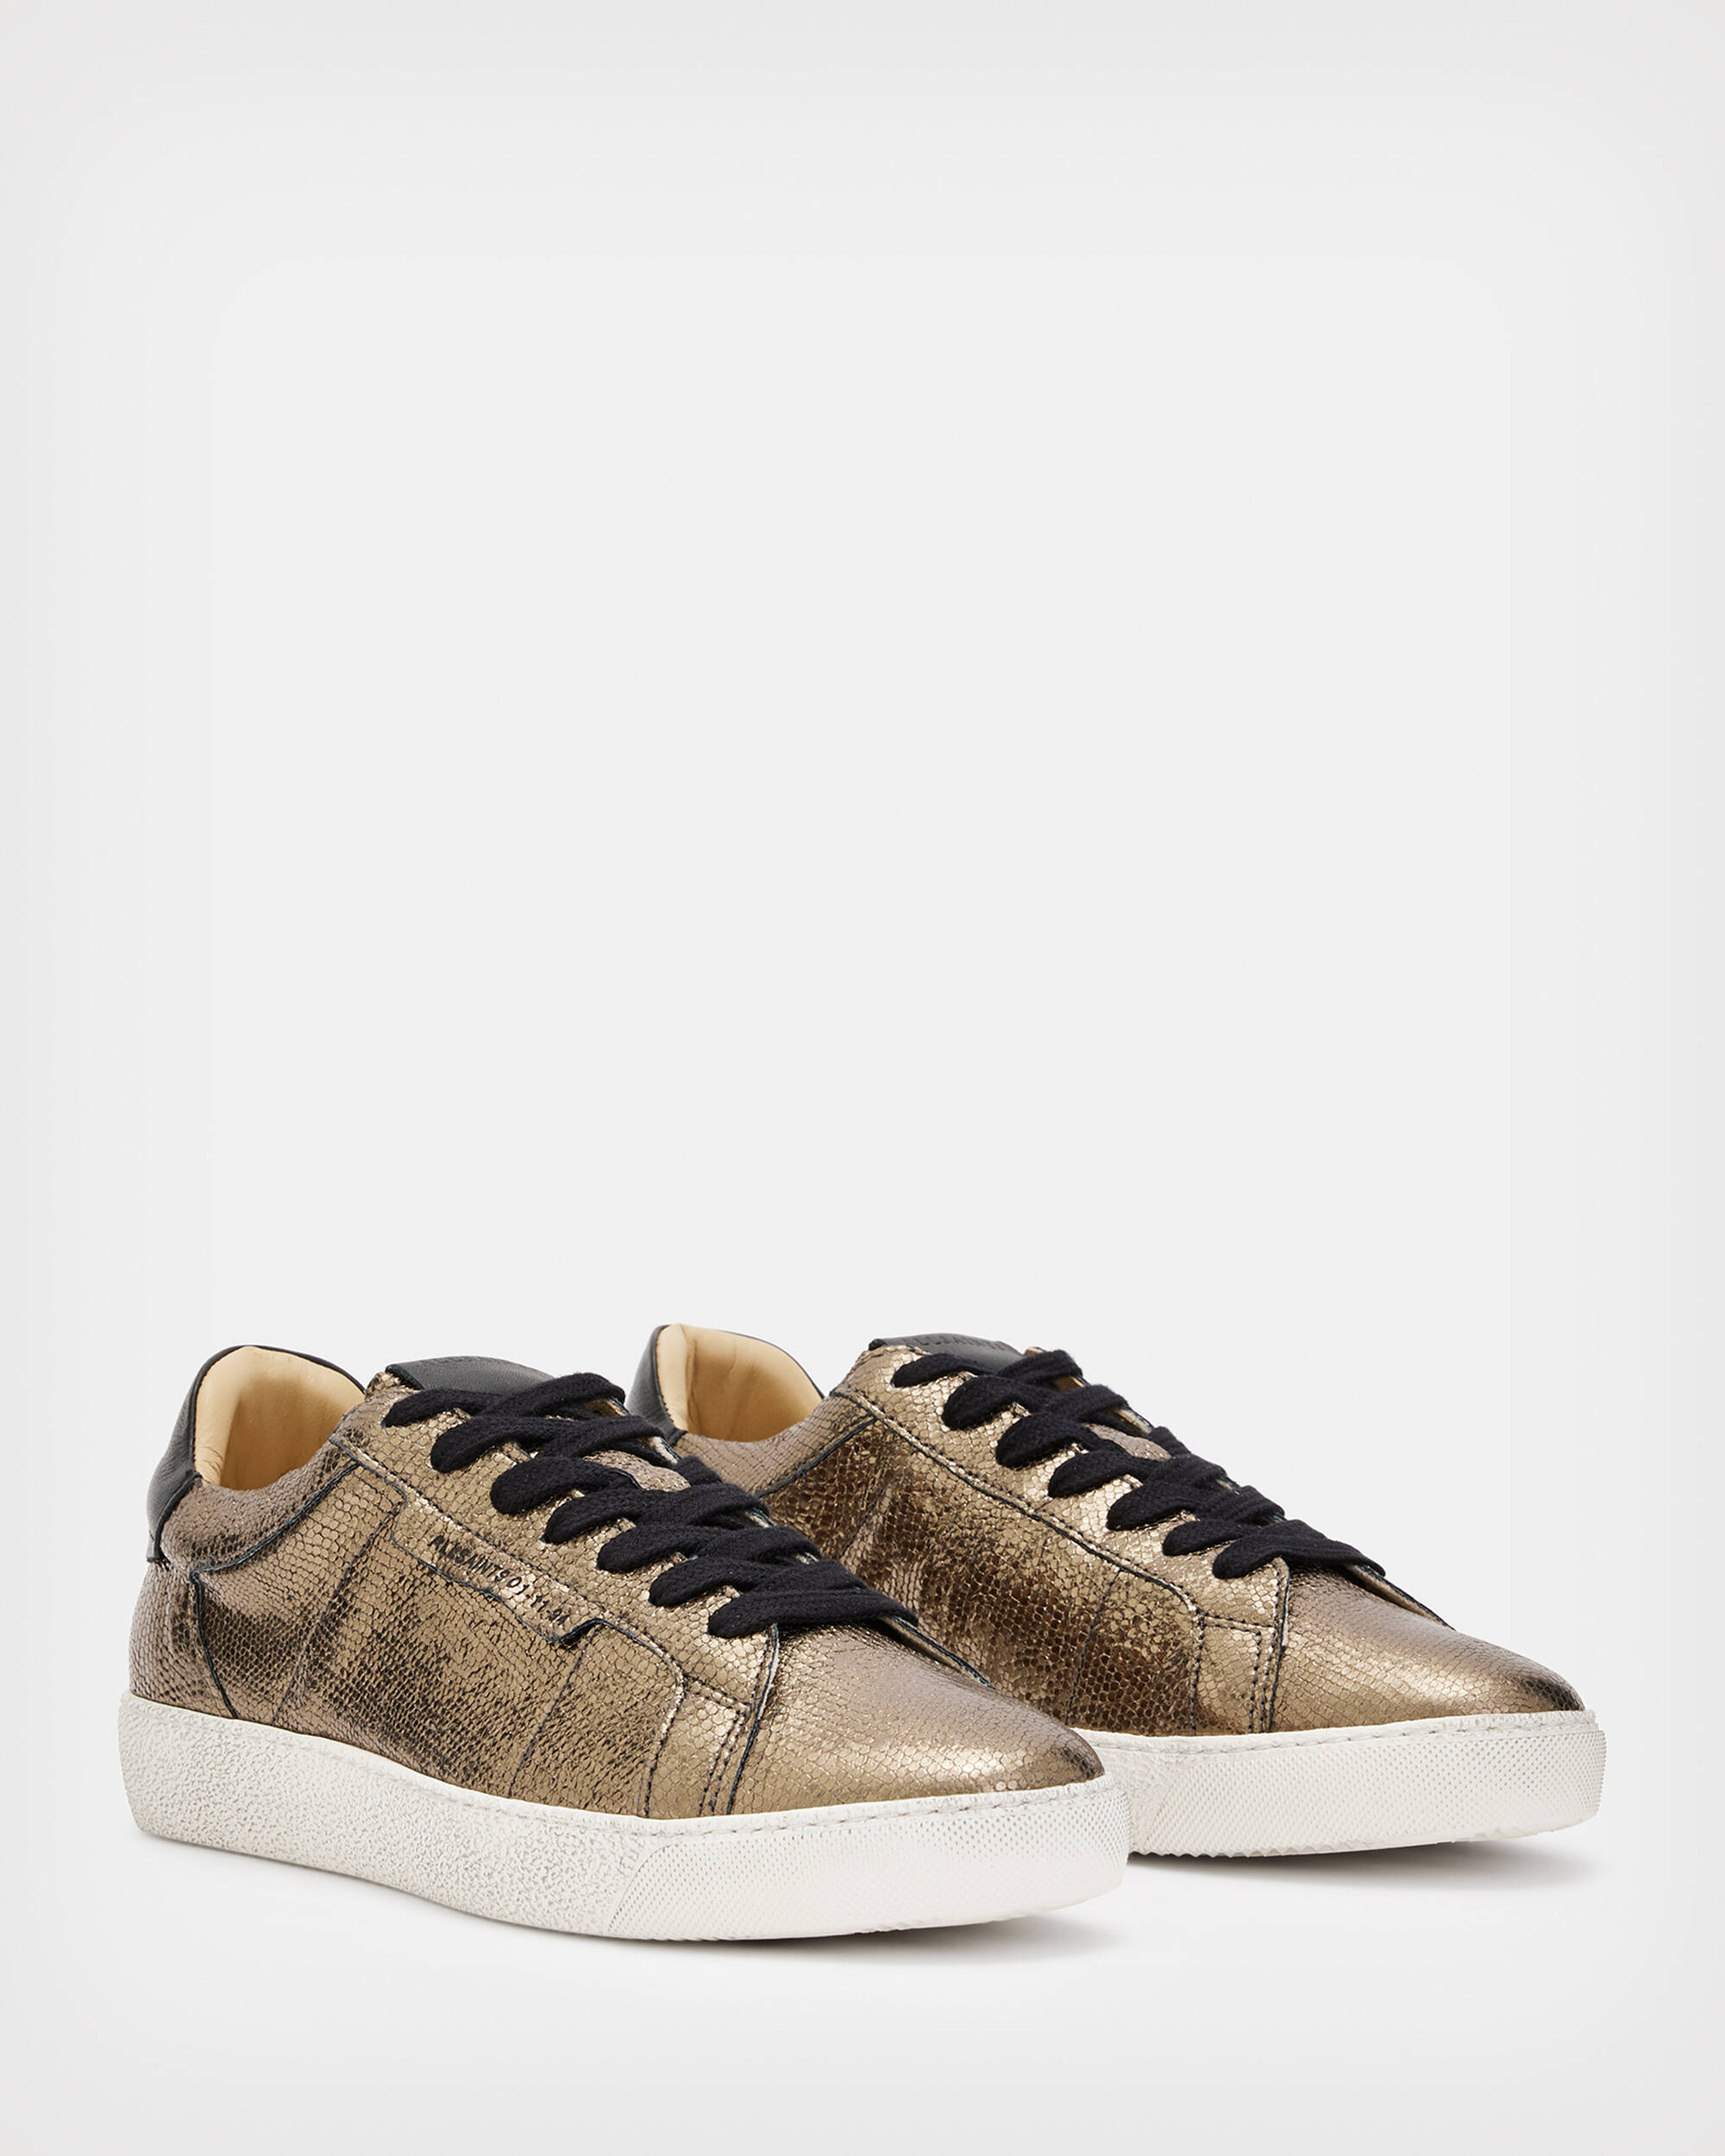 Sheer Leather Shimmer Sneakers  large image number 4